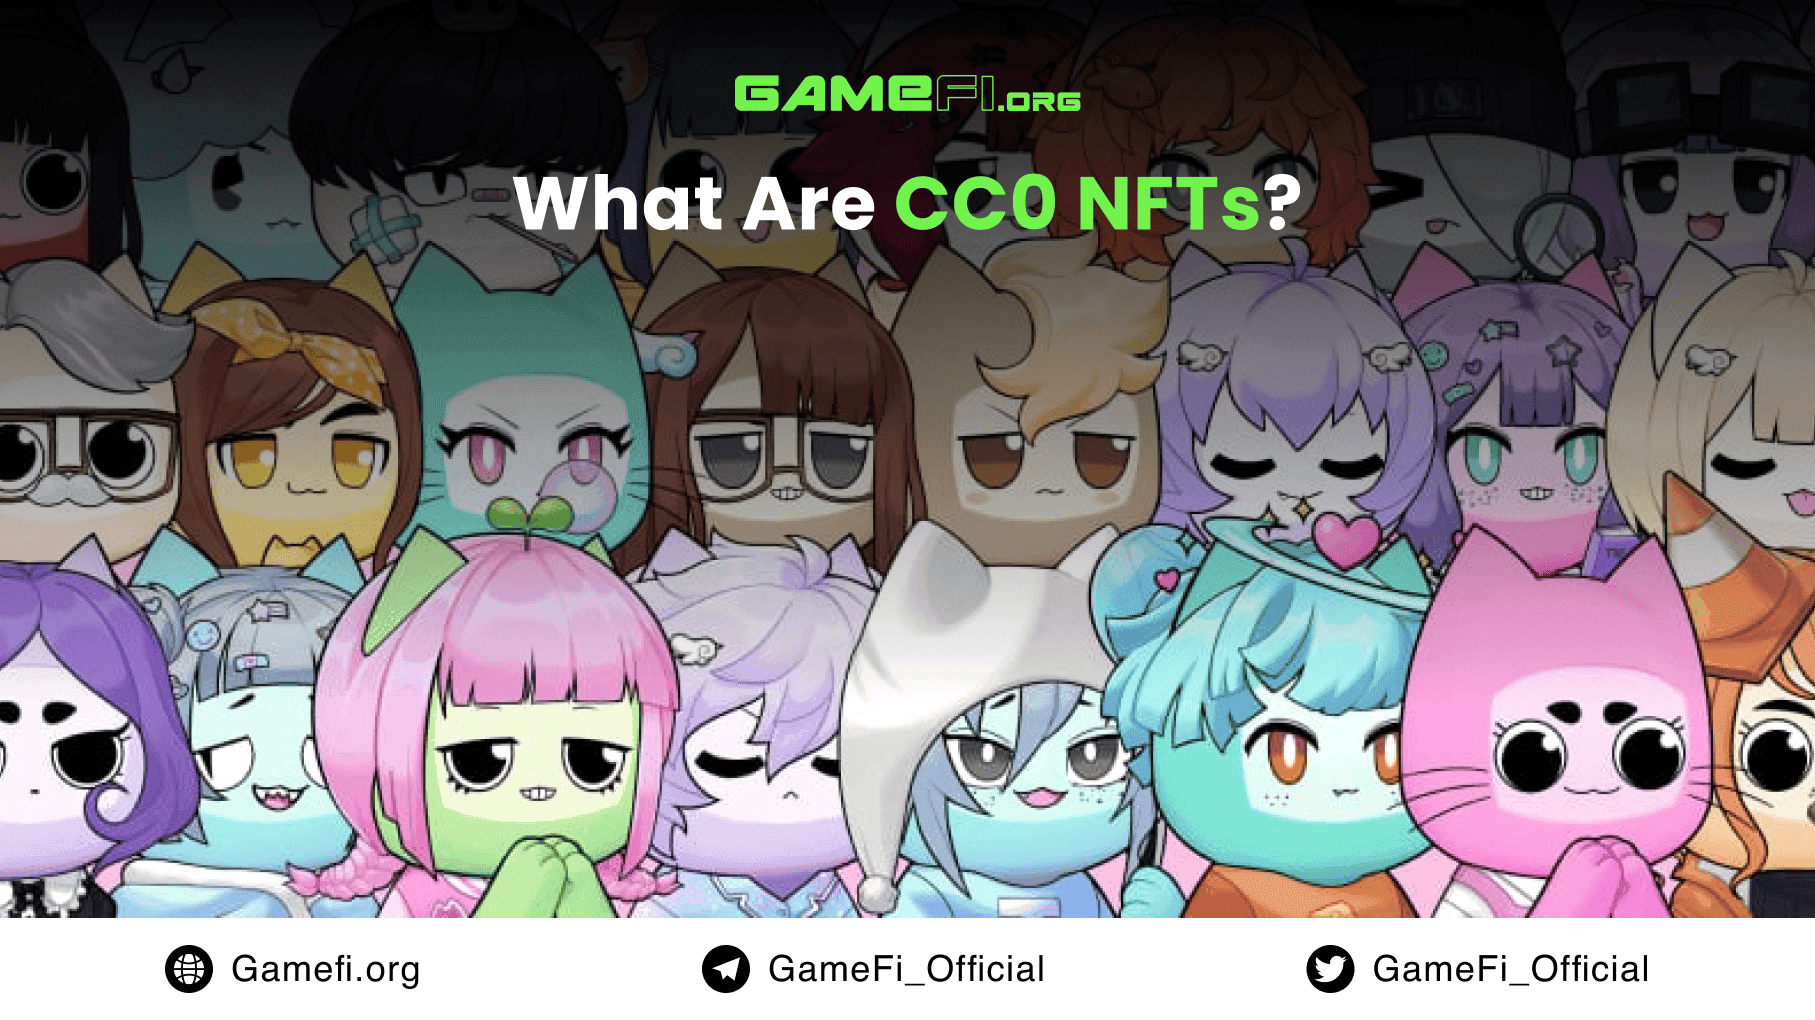 What Are CC0 NFTs?